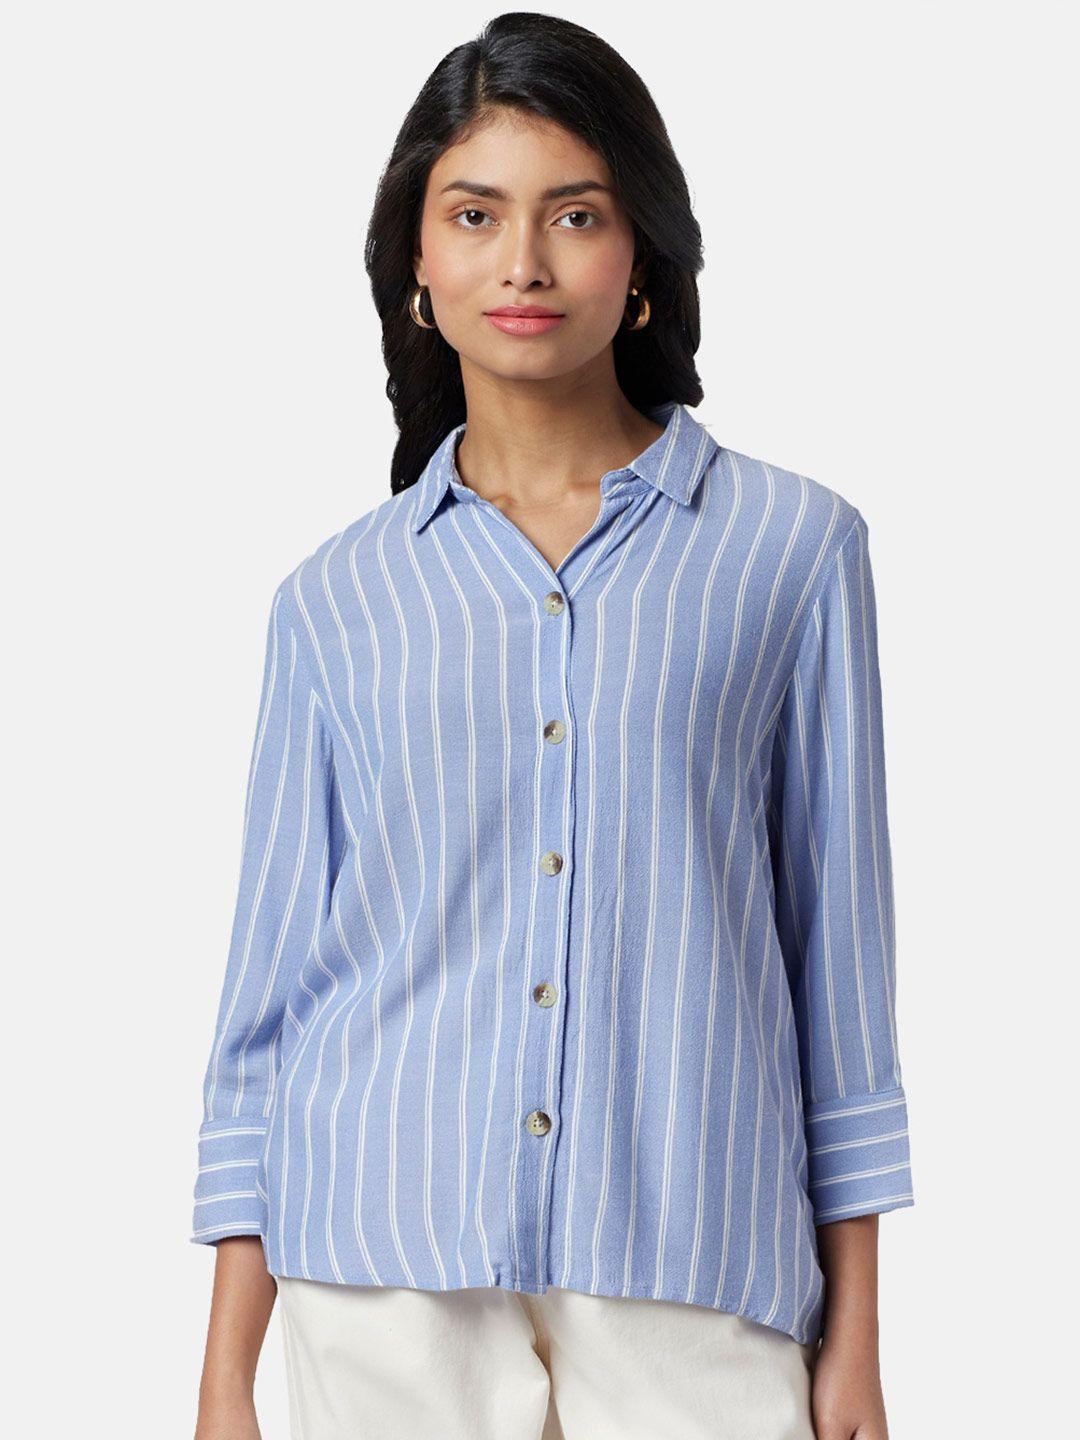 honey by pantaloons striped shirt style top